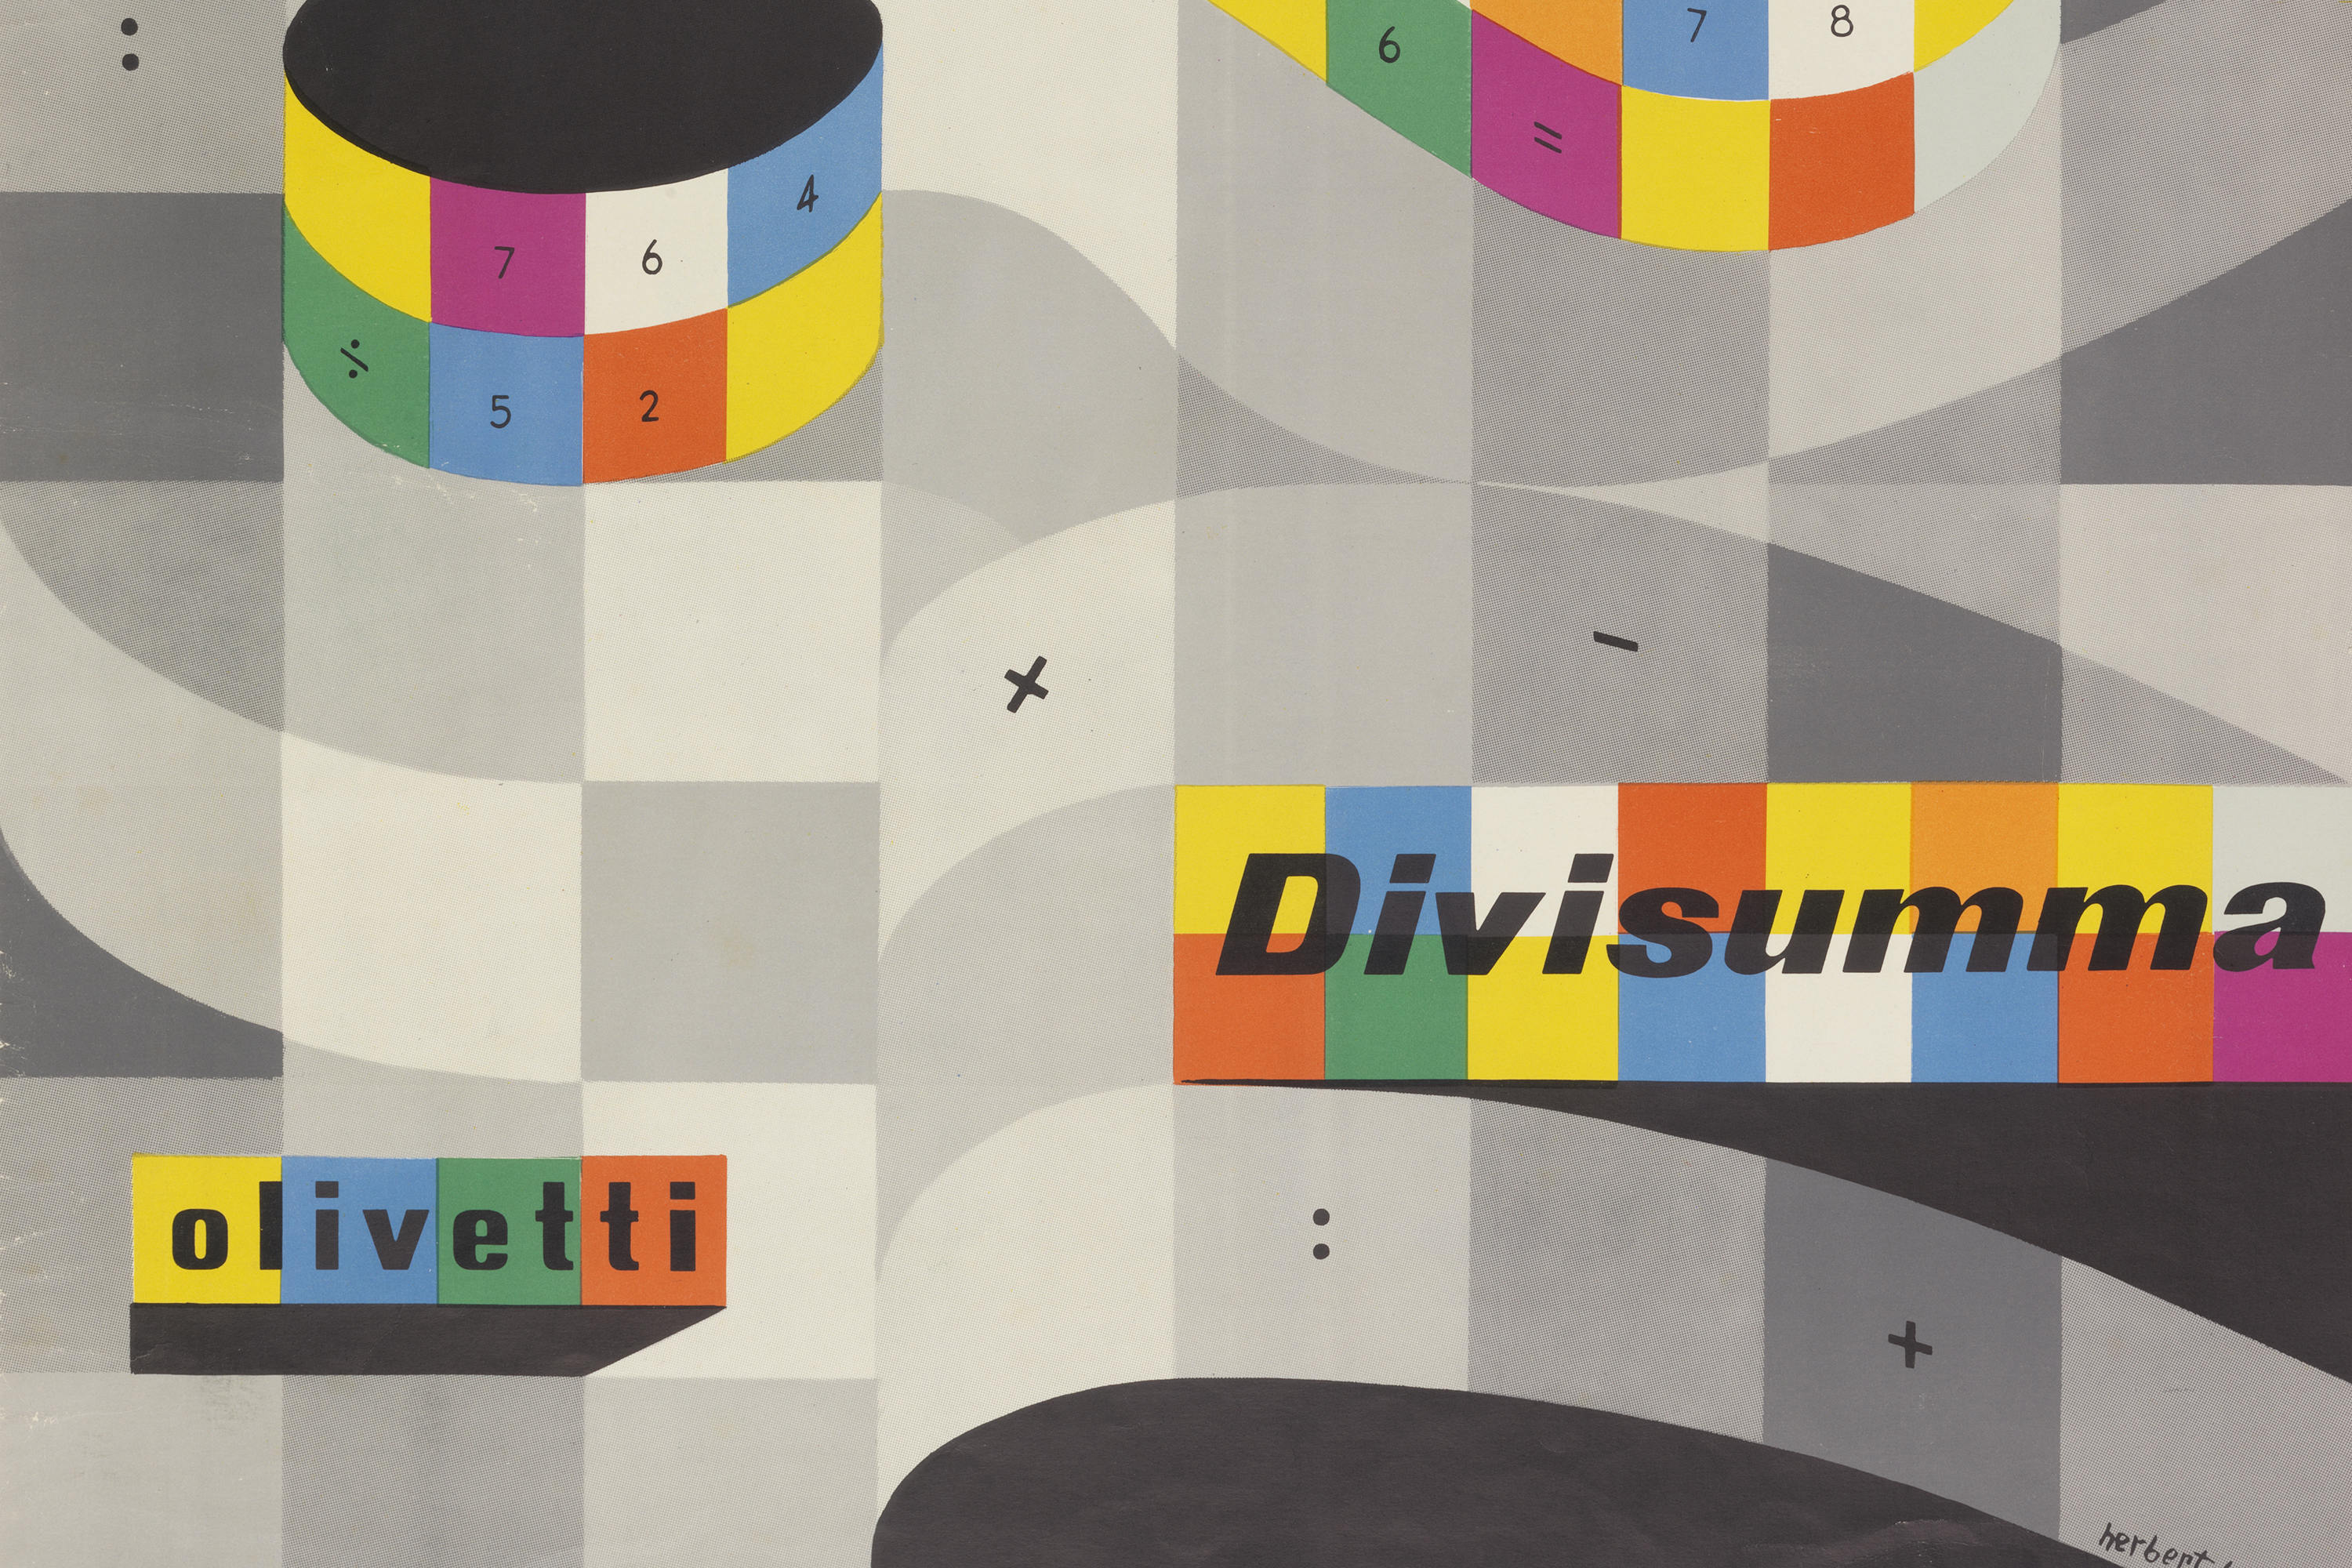 Ribbon-like folds of black and white cubes overlaid with colorful cube ribbons that say "Olivetti" and "Divisumma" and have digits and plus, minus, division, equals sighns